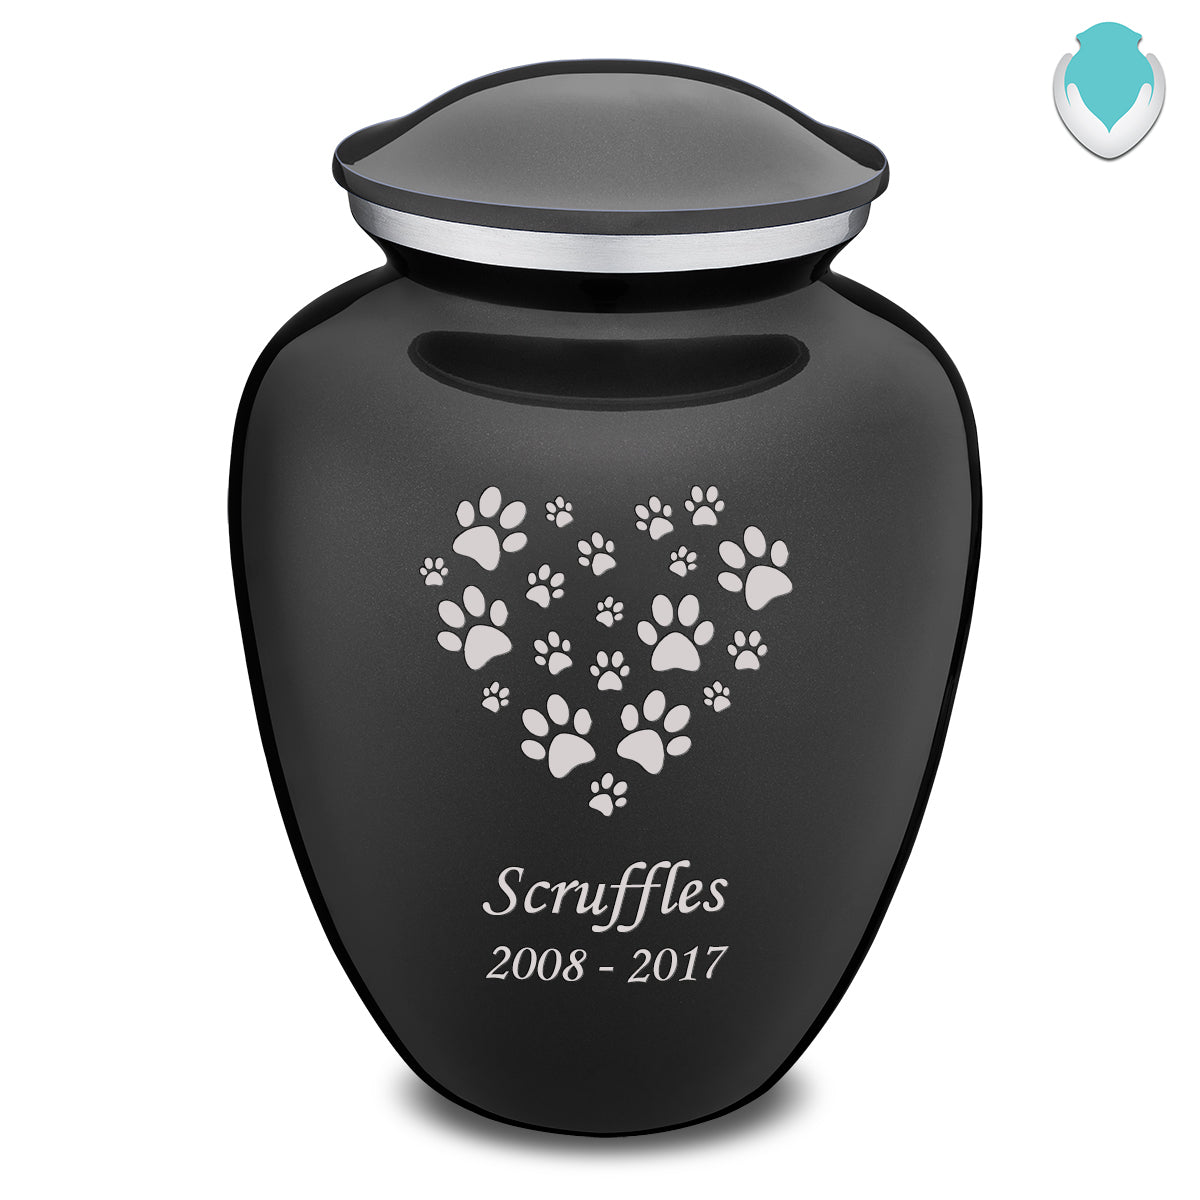 Large Embrace Charcoal Heart Paws Pet Cremation Urn